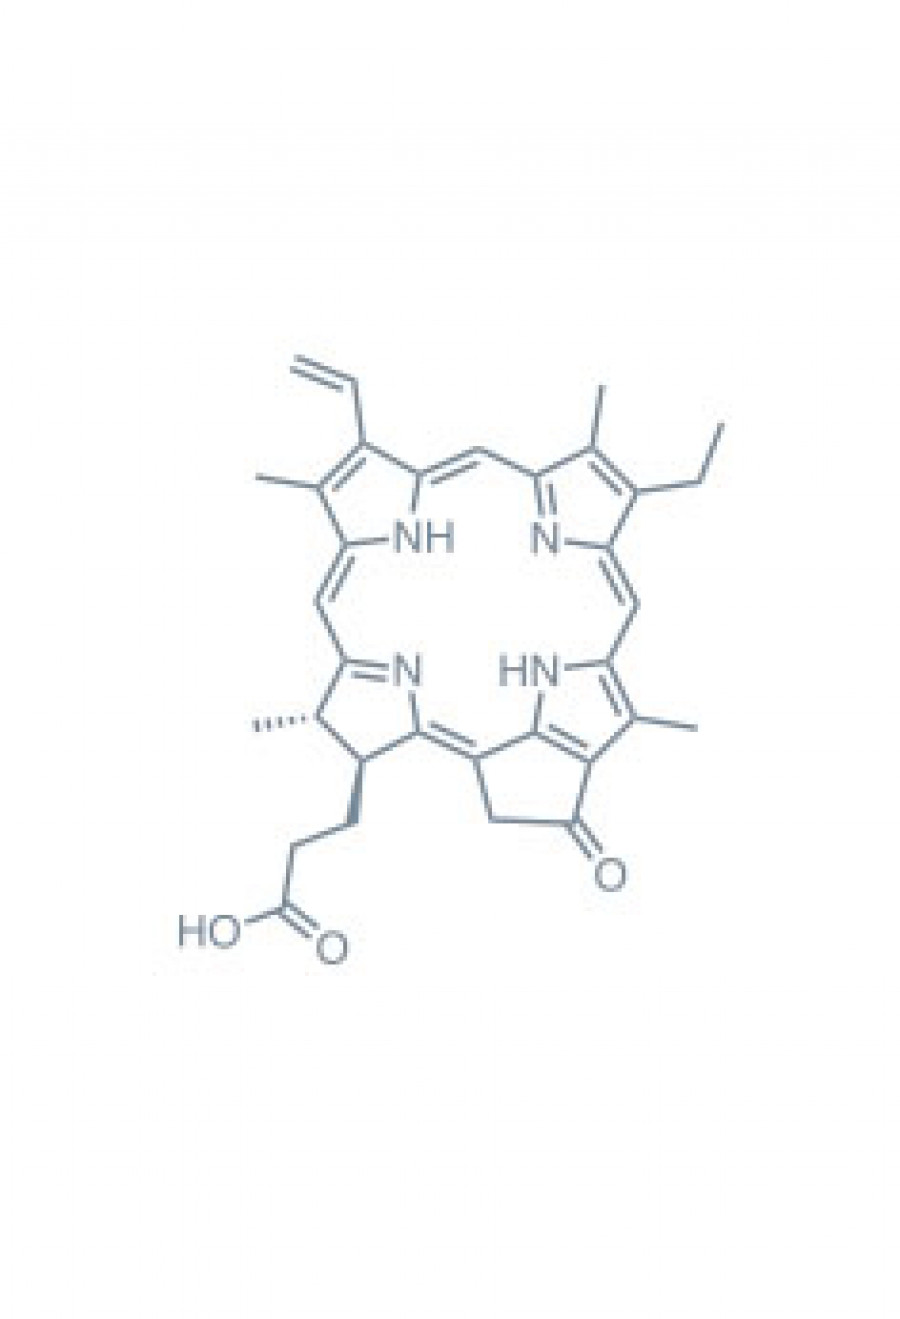 pyropheophorbide a  | Porphychem Expert porphyrin synthesis for research & industry